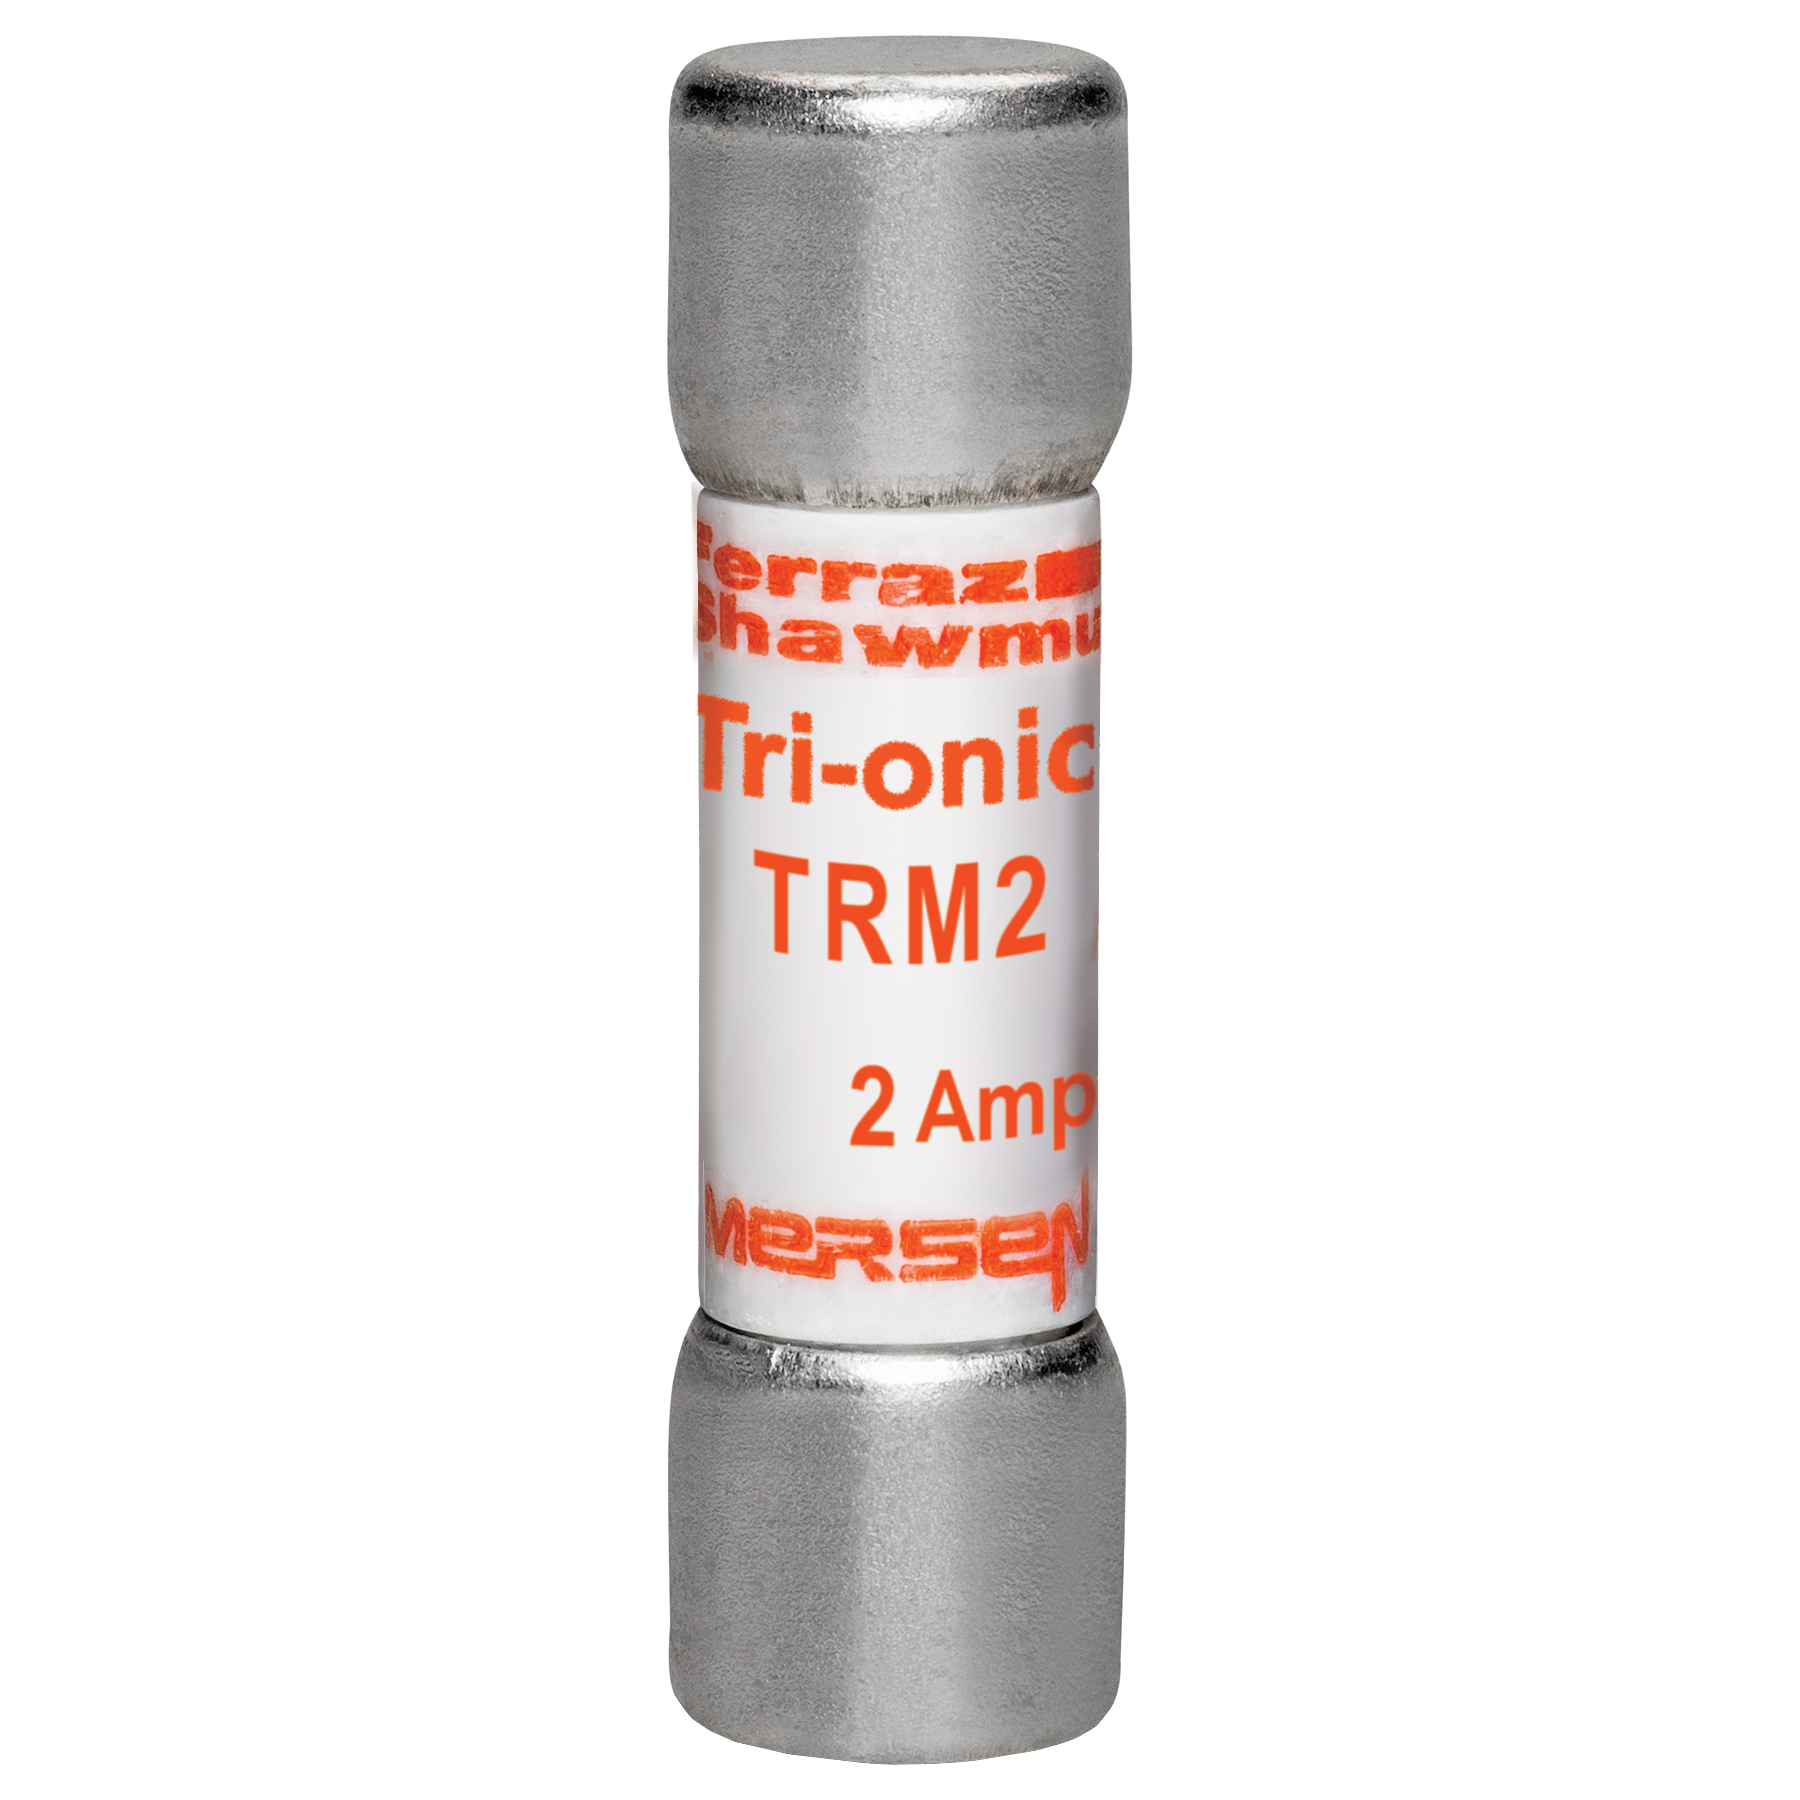 the part number is TRM2